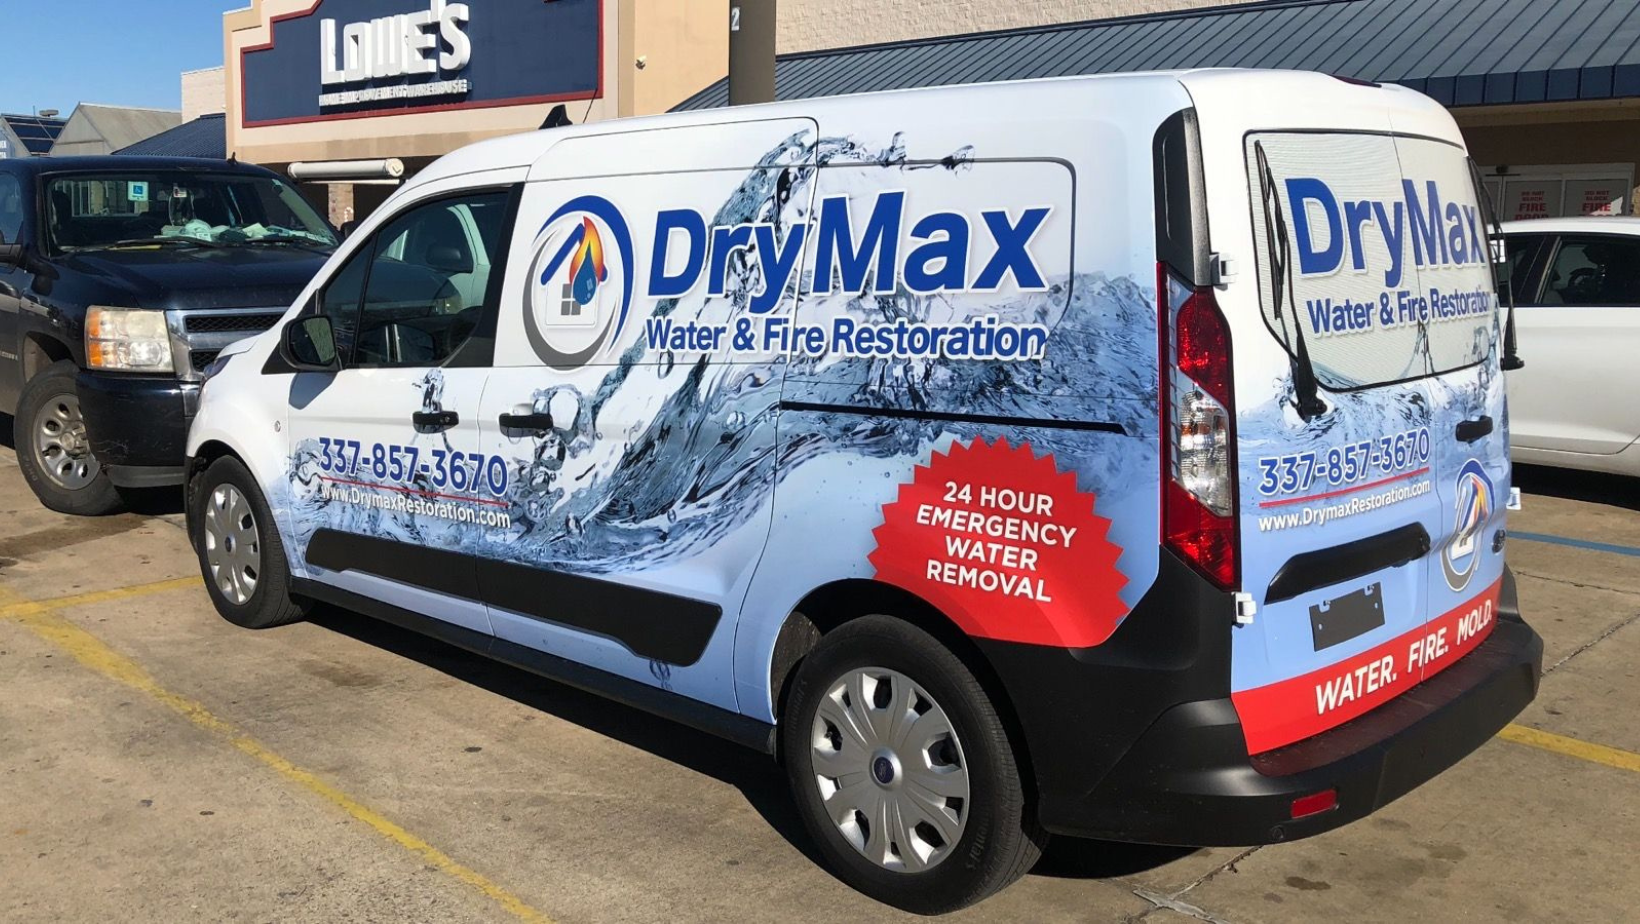 DryMax is a local fire damage cleanup company in New Orleans, LA